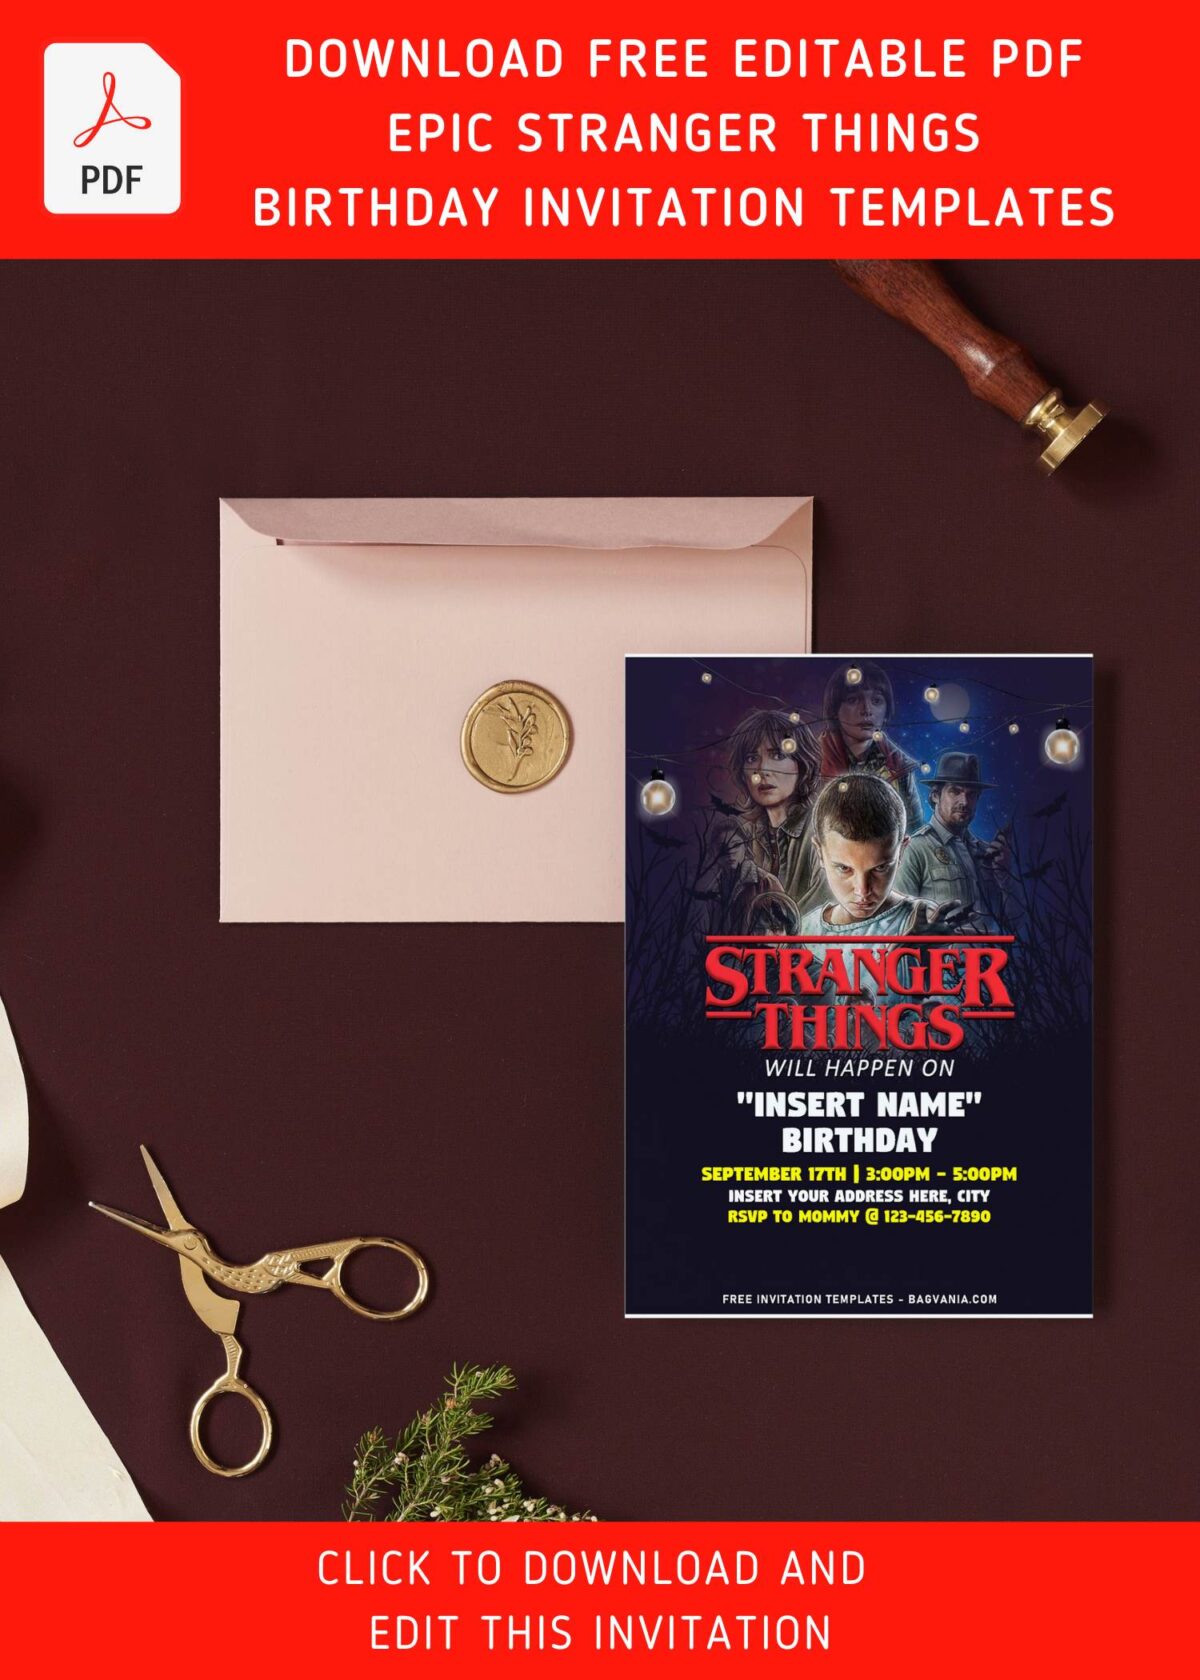 (Free Editable PDF) Stranger Things Are Happening Birthday Invitation Templates with Stranger Things poster